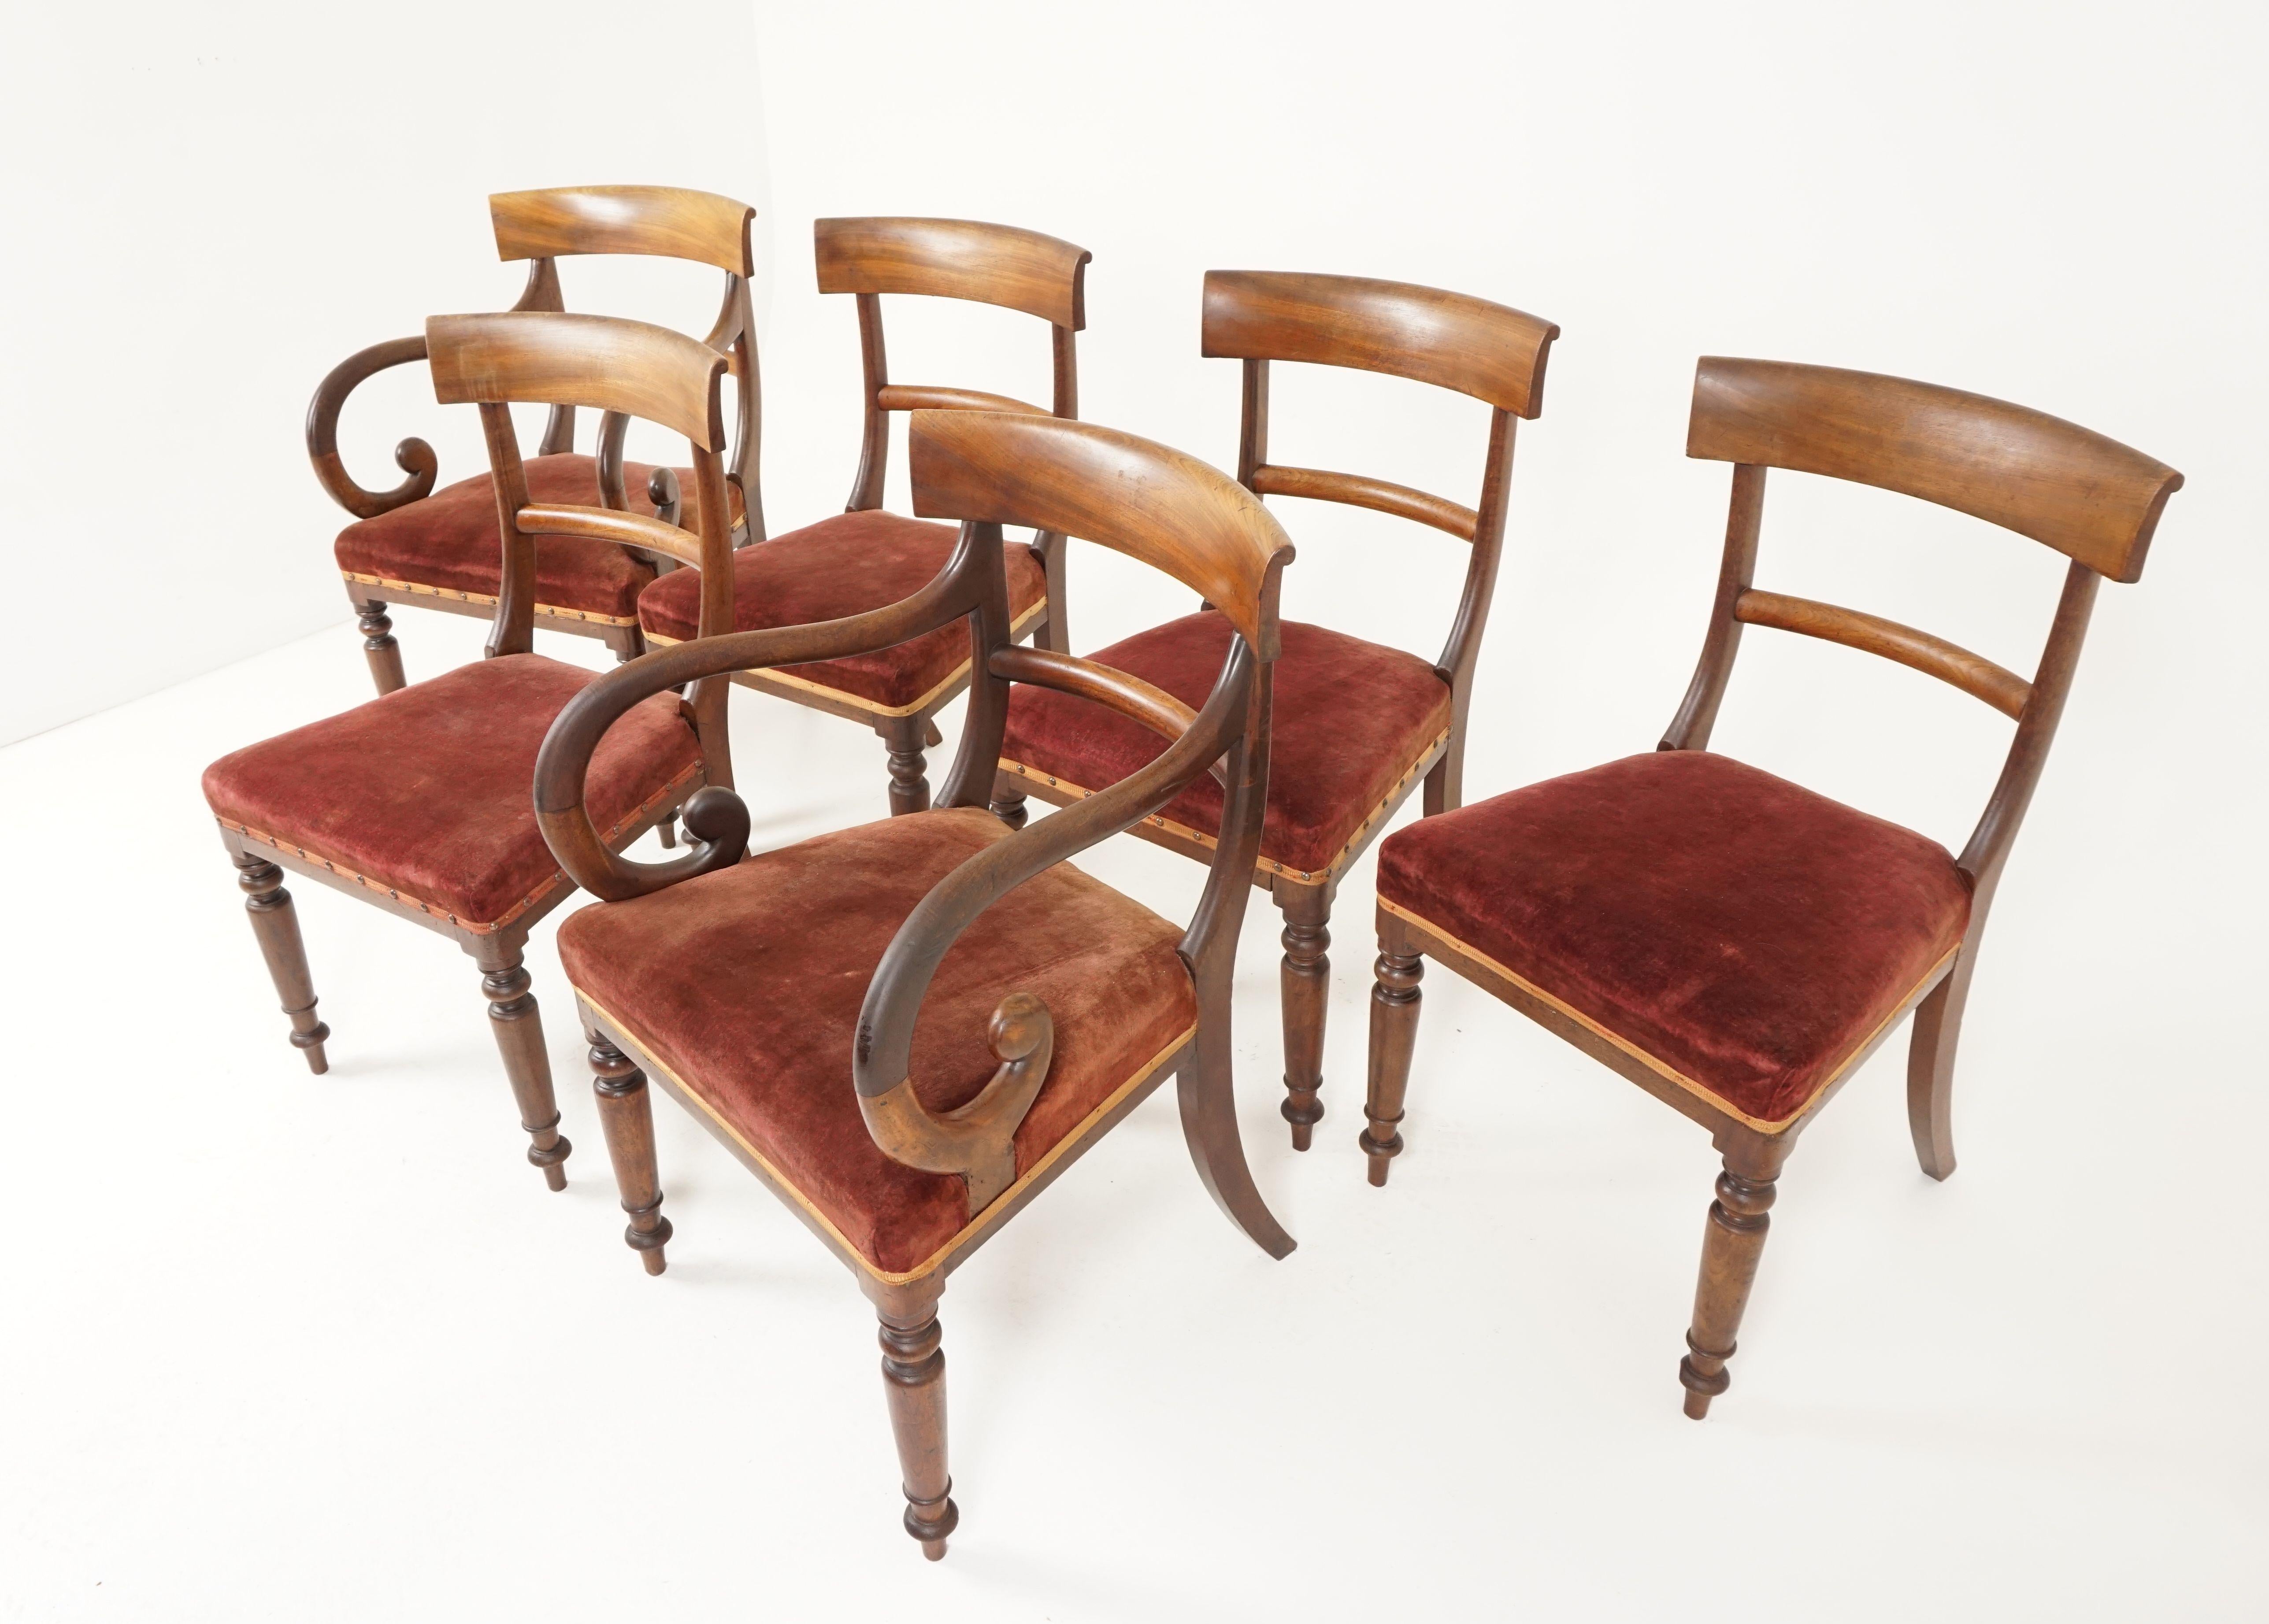 6 early Victorian walnut dining chairs (4+2), Scotland 1840, B2374

Scotland 1840
Solid Walnut
Original finish
Nicely curved back rails
Velvet padded upholstered seats
Arm chairs have generous scrolling arms
All standing on ring turned front legs